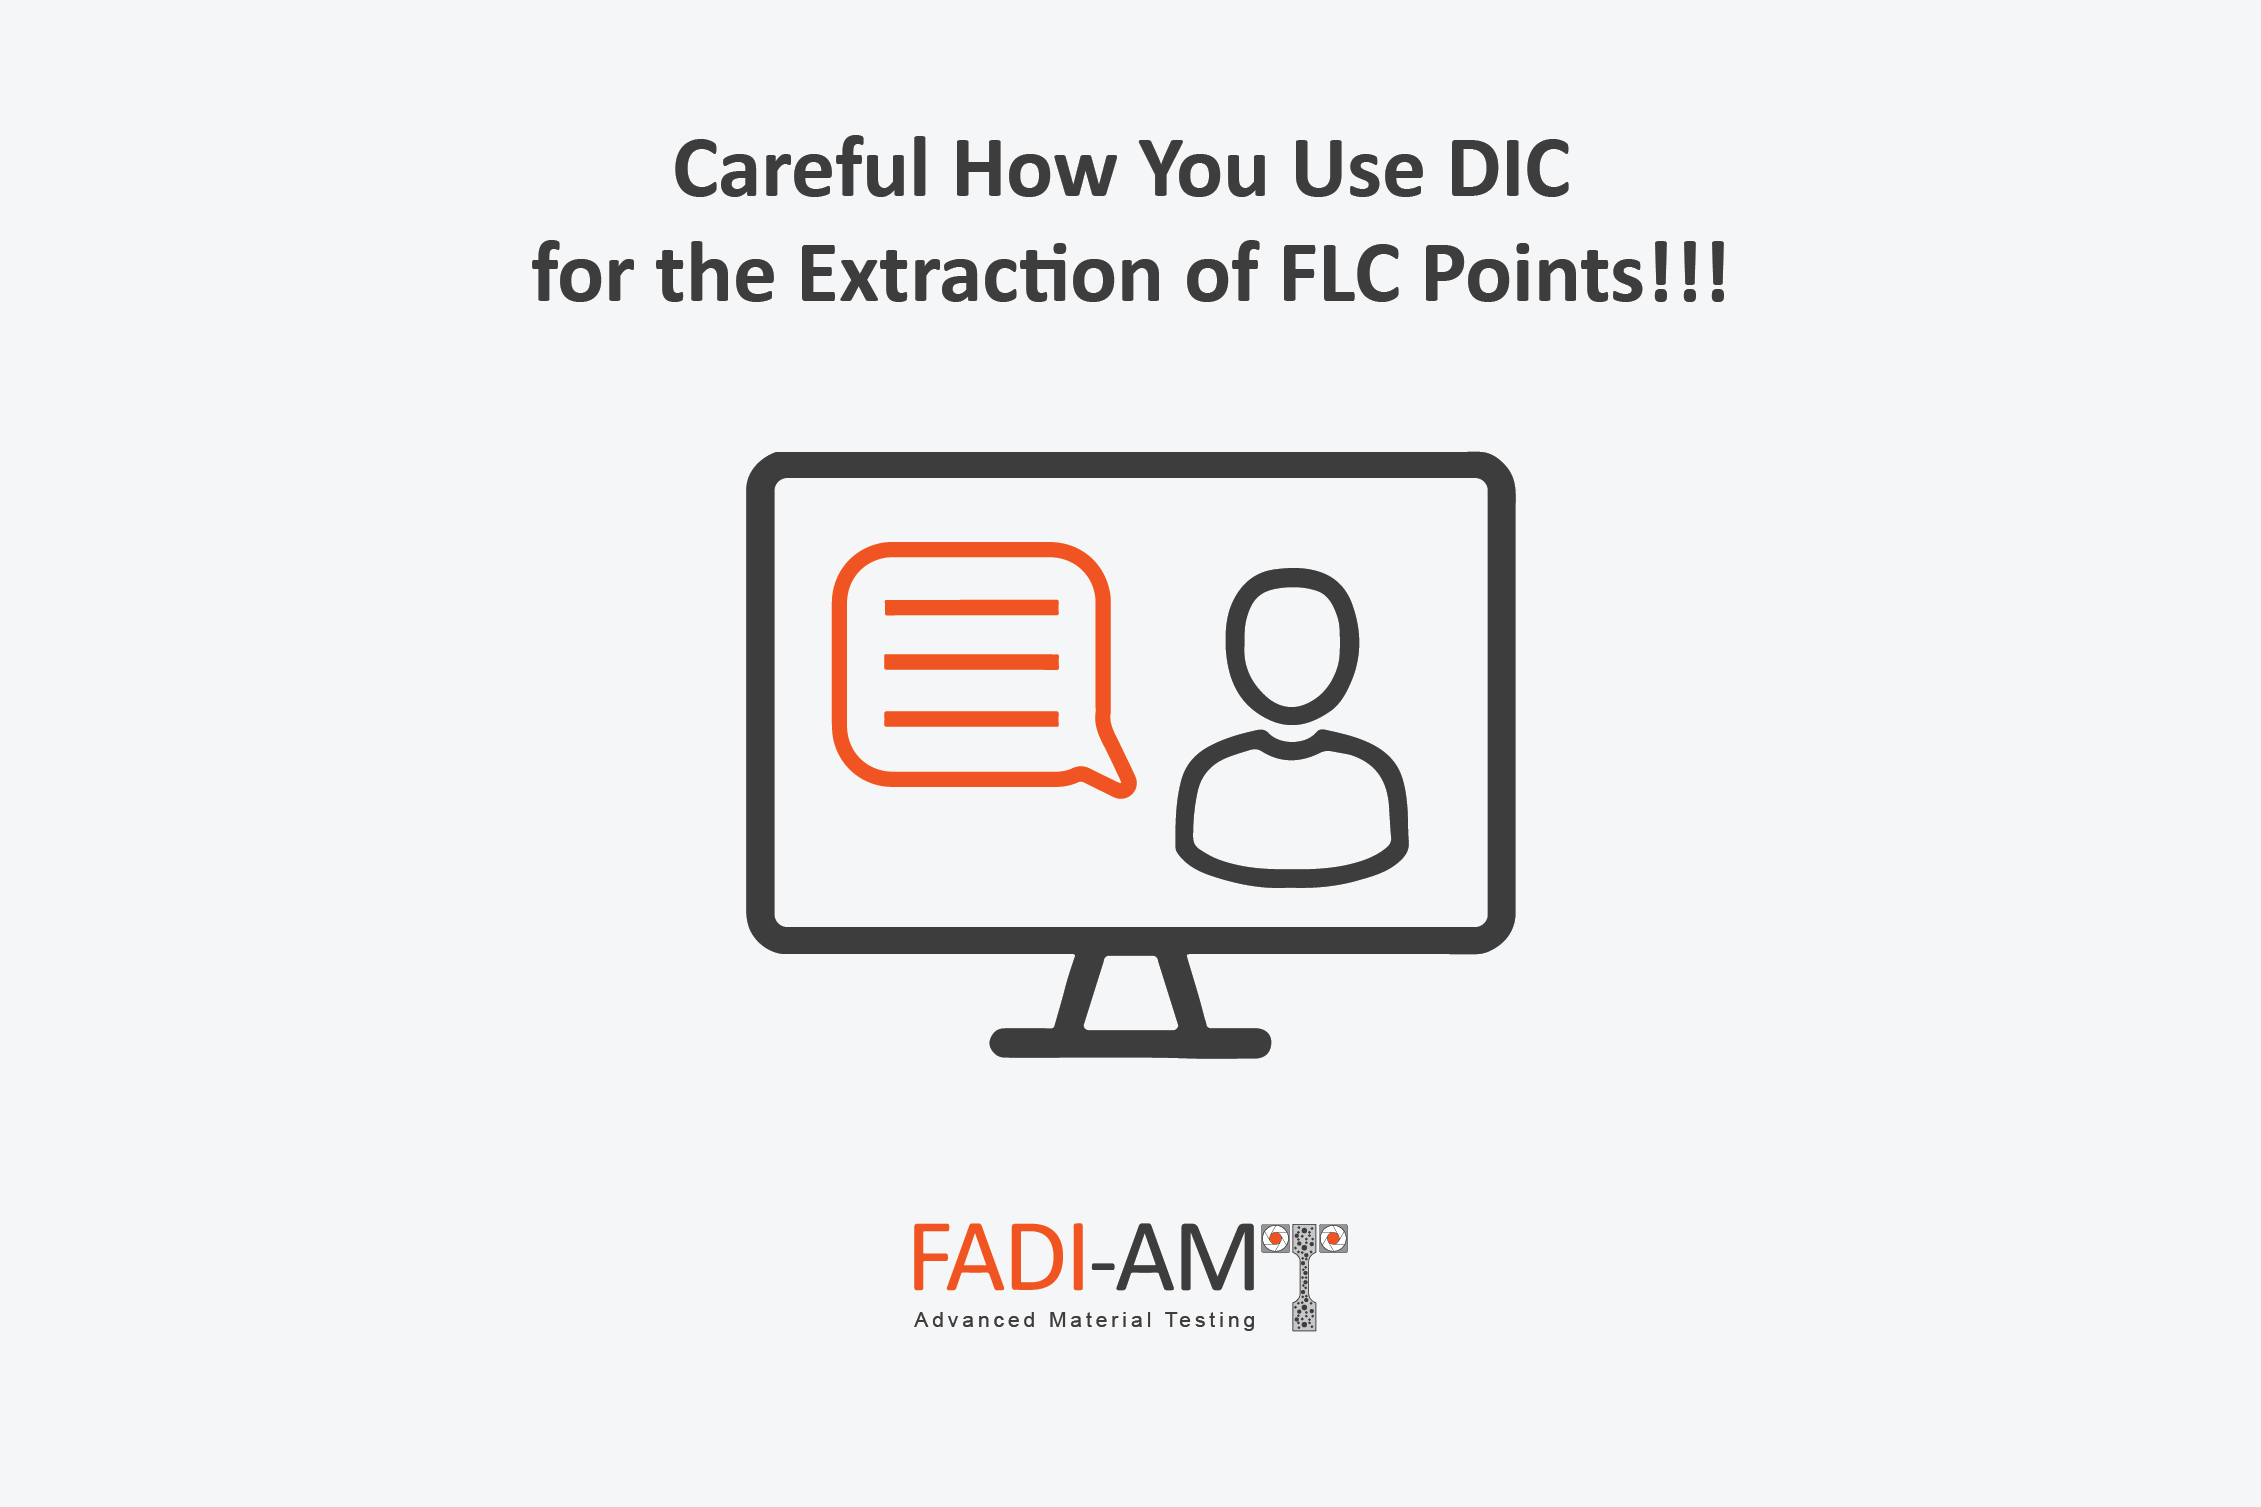 Careful How You Use DIC for the Extraction of FLC Points! FADI-AMT Webcast